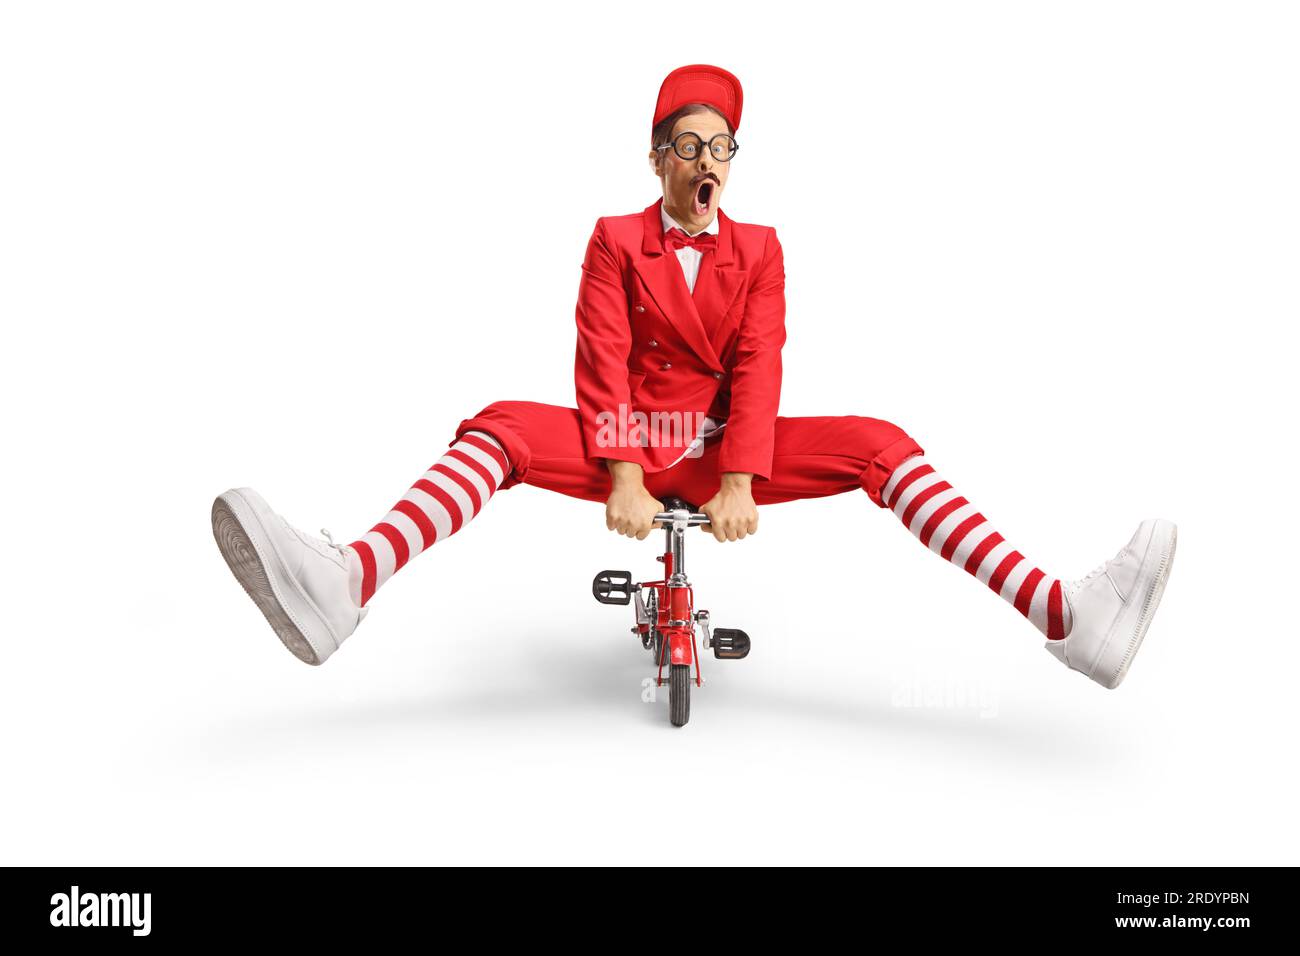 Funny man in a red suit riding a small red bike isolated on white background Stock Photo